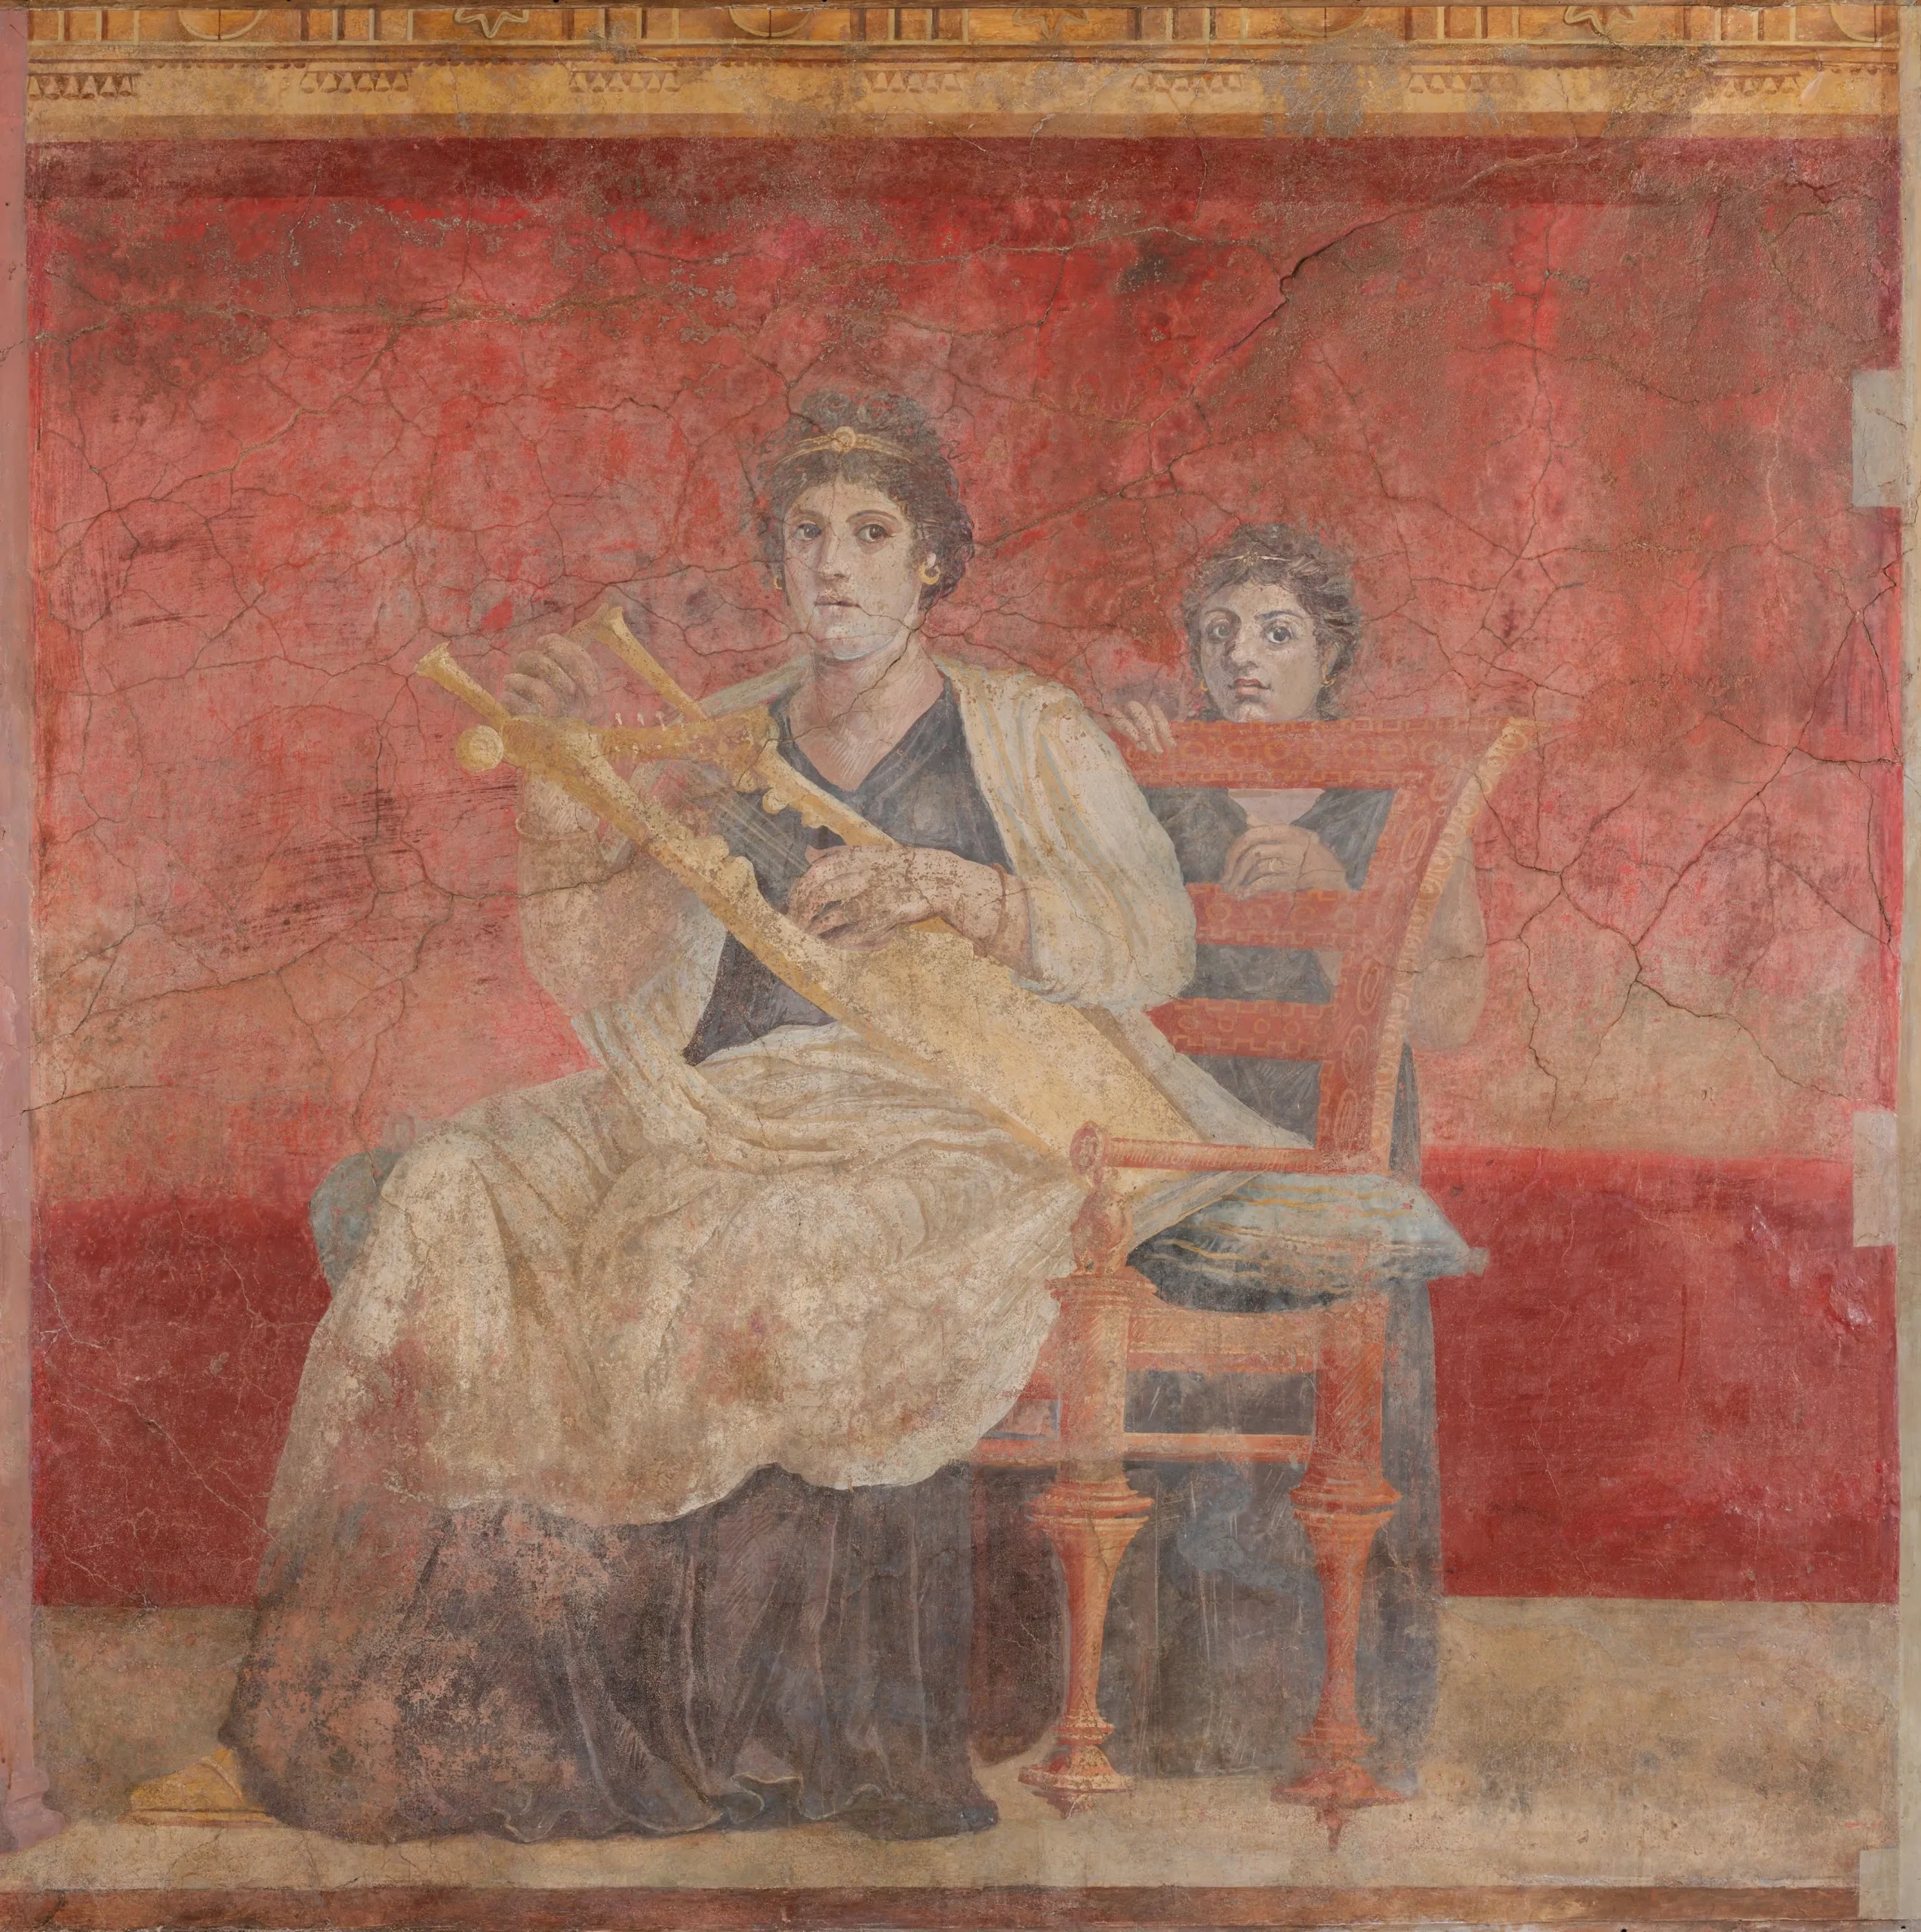 Wall fresco showing a seated woman, possibly Berenice II of Ptolemaic Egypt, wearing a royal diadem, this fresco from the Roman Villa Boscoreale offers a glimpse into the lavish life of ancient royalty in the mid-1st century BC